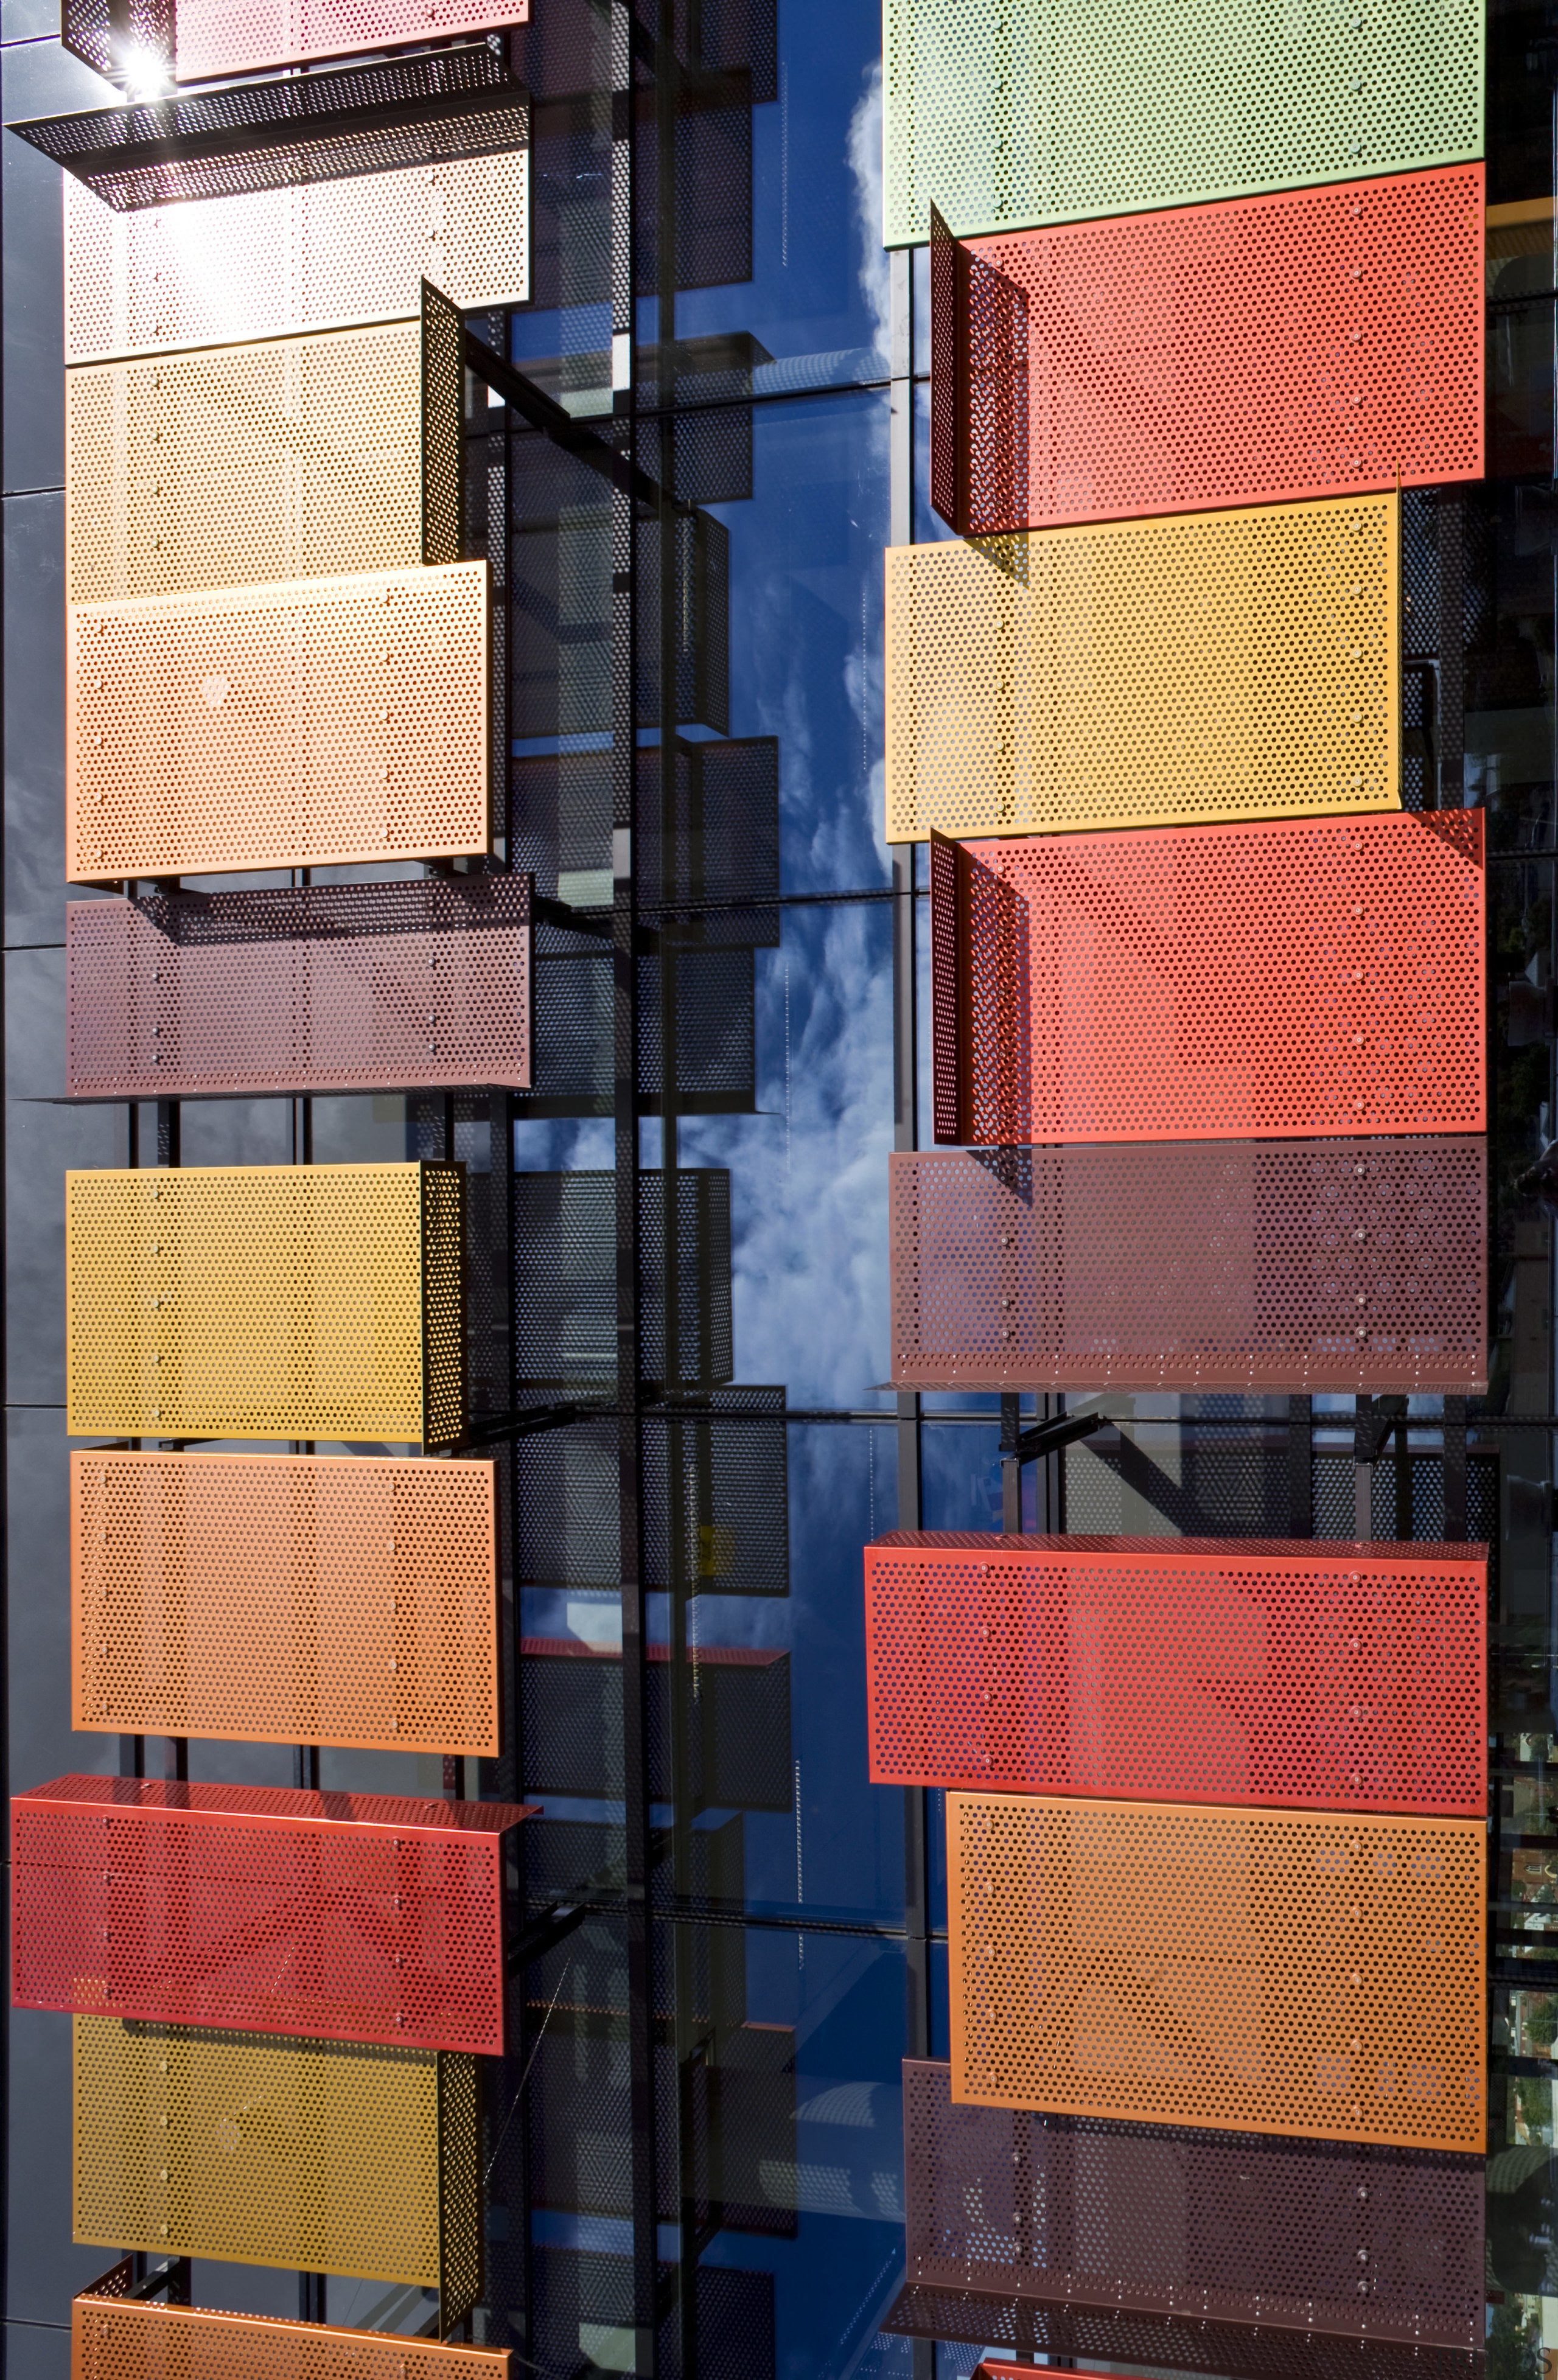 view of the sustainable Bendigo Bank offices where architecture, building, facade, line, wall, wood, yellow, red